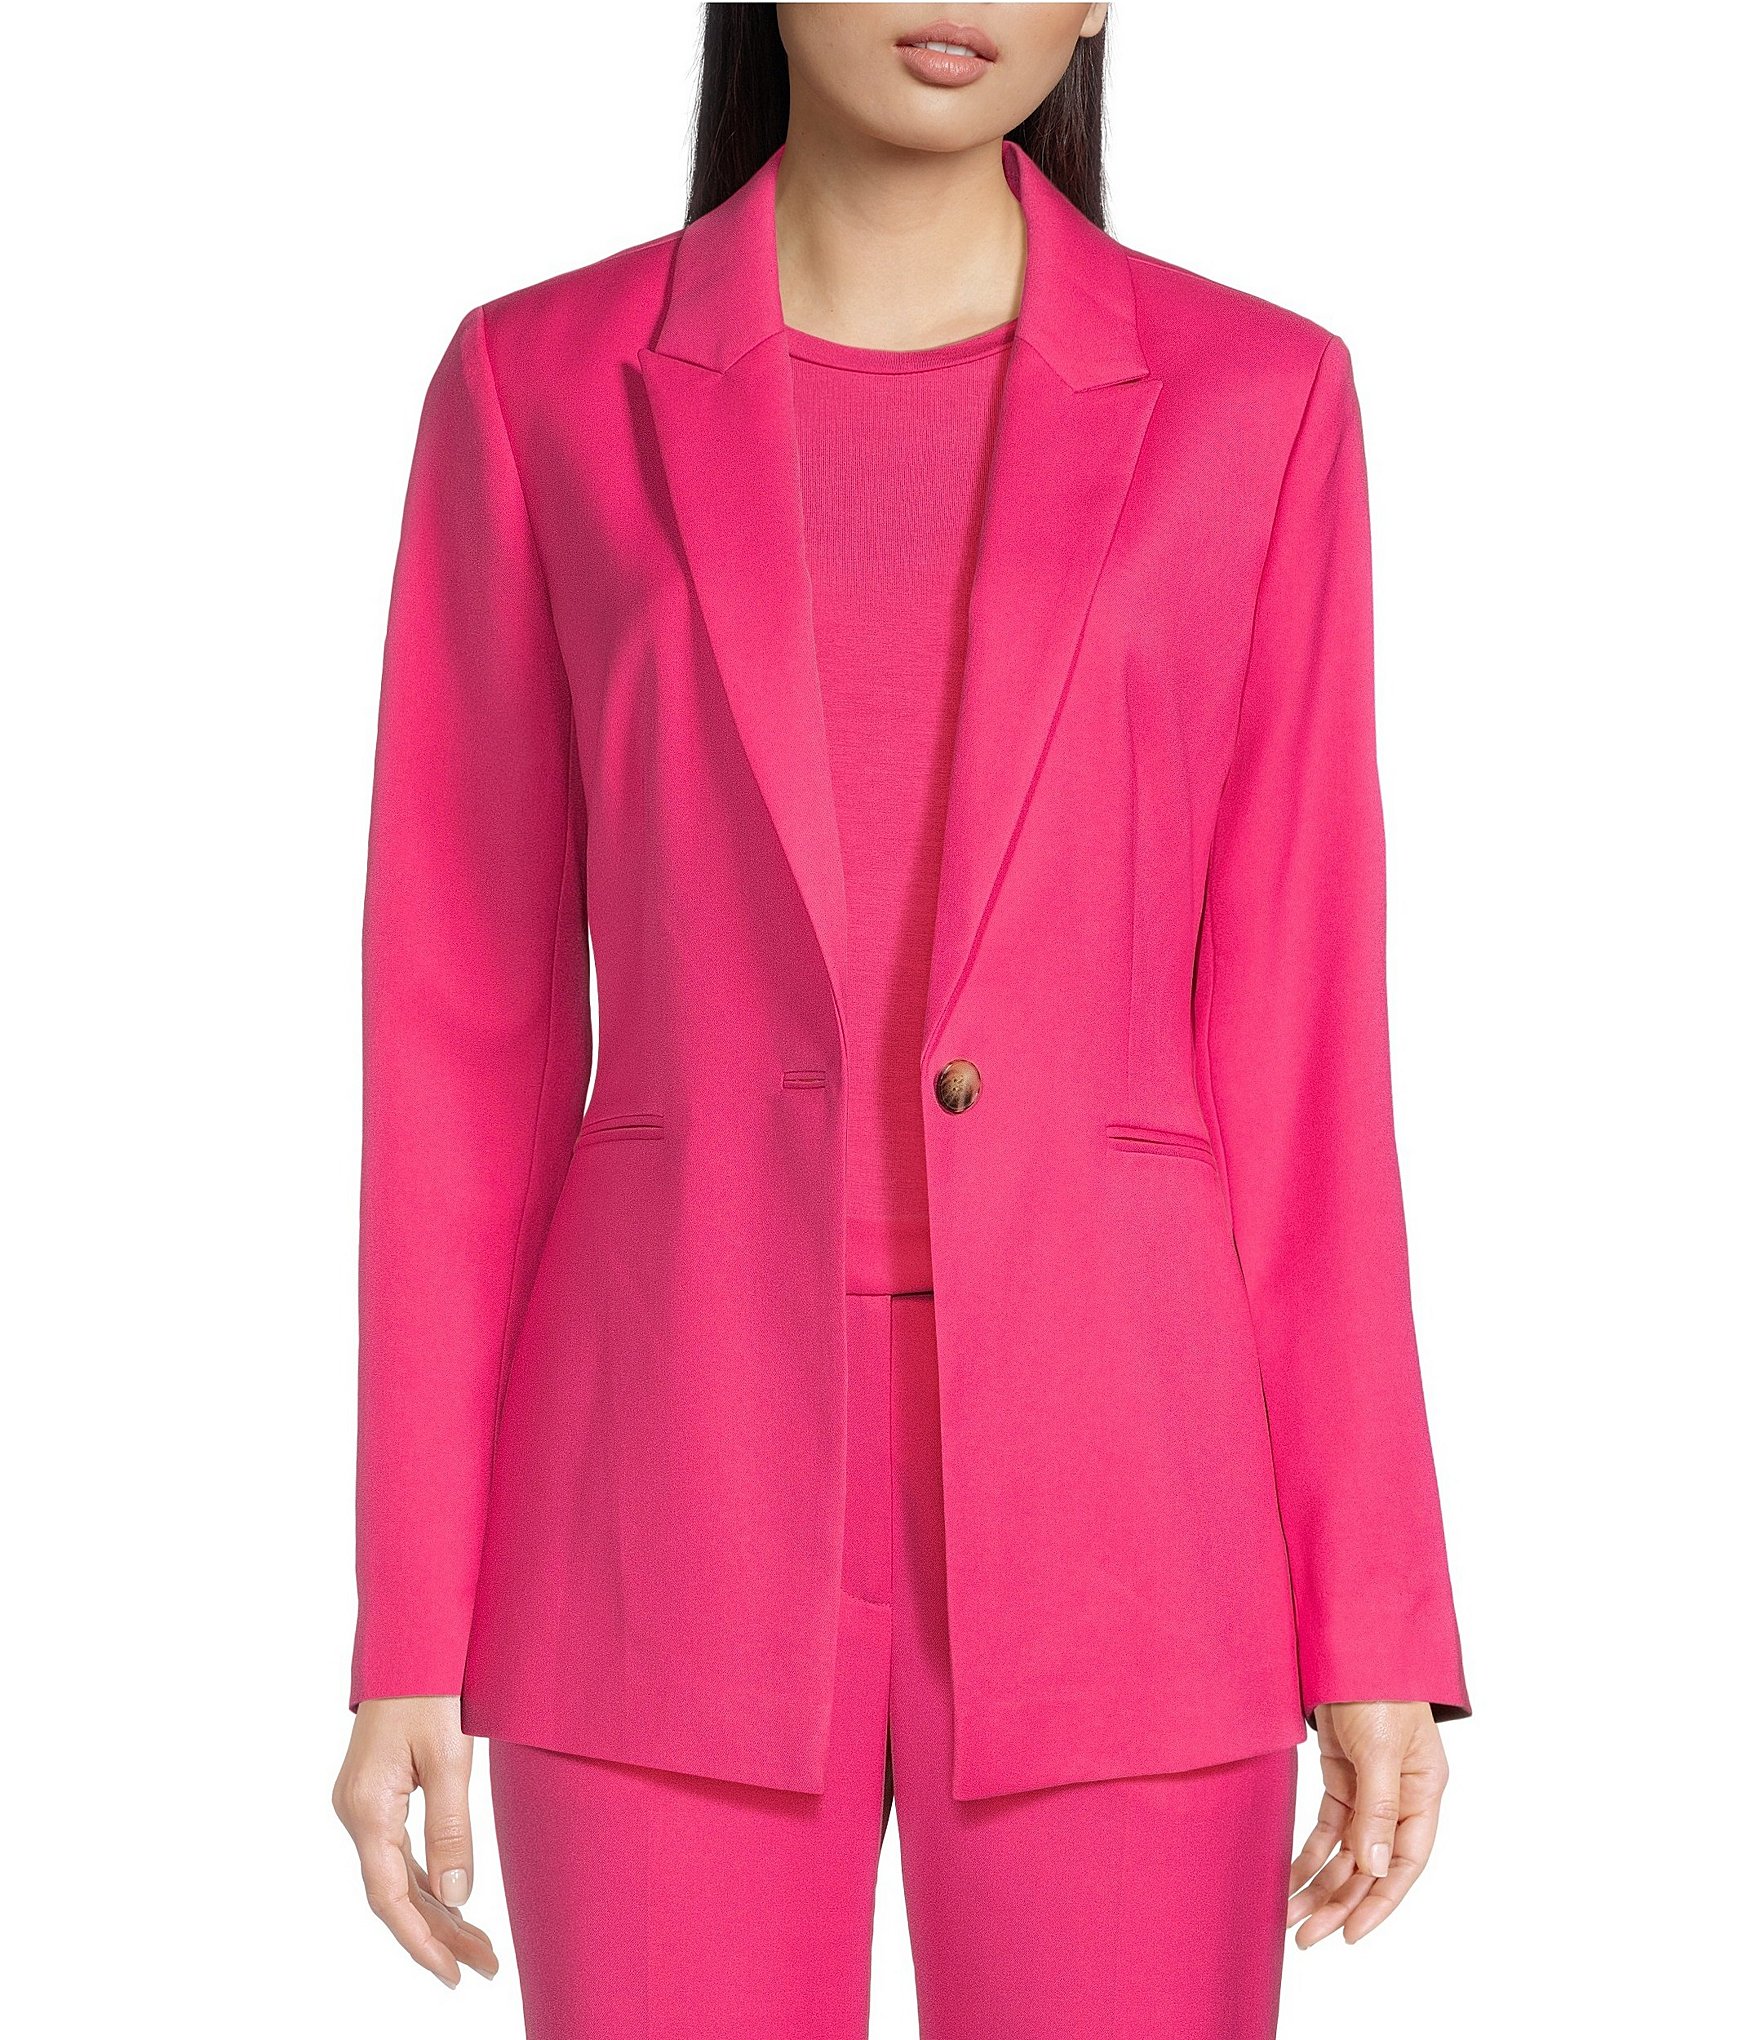 Hot Pink Pantsuit for Women, Pink Flared Pants Suit With Fitted Blazer, Pink  Formal Blazer Trouser for Women, Formal Womens Wear Office -  Norway